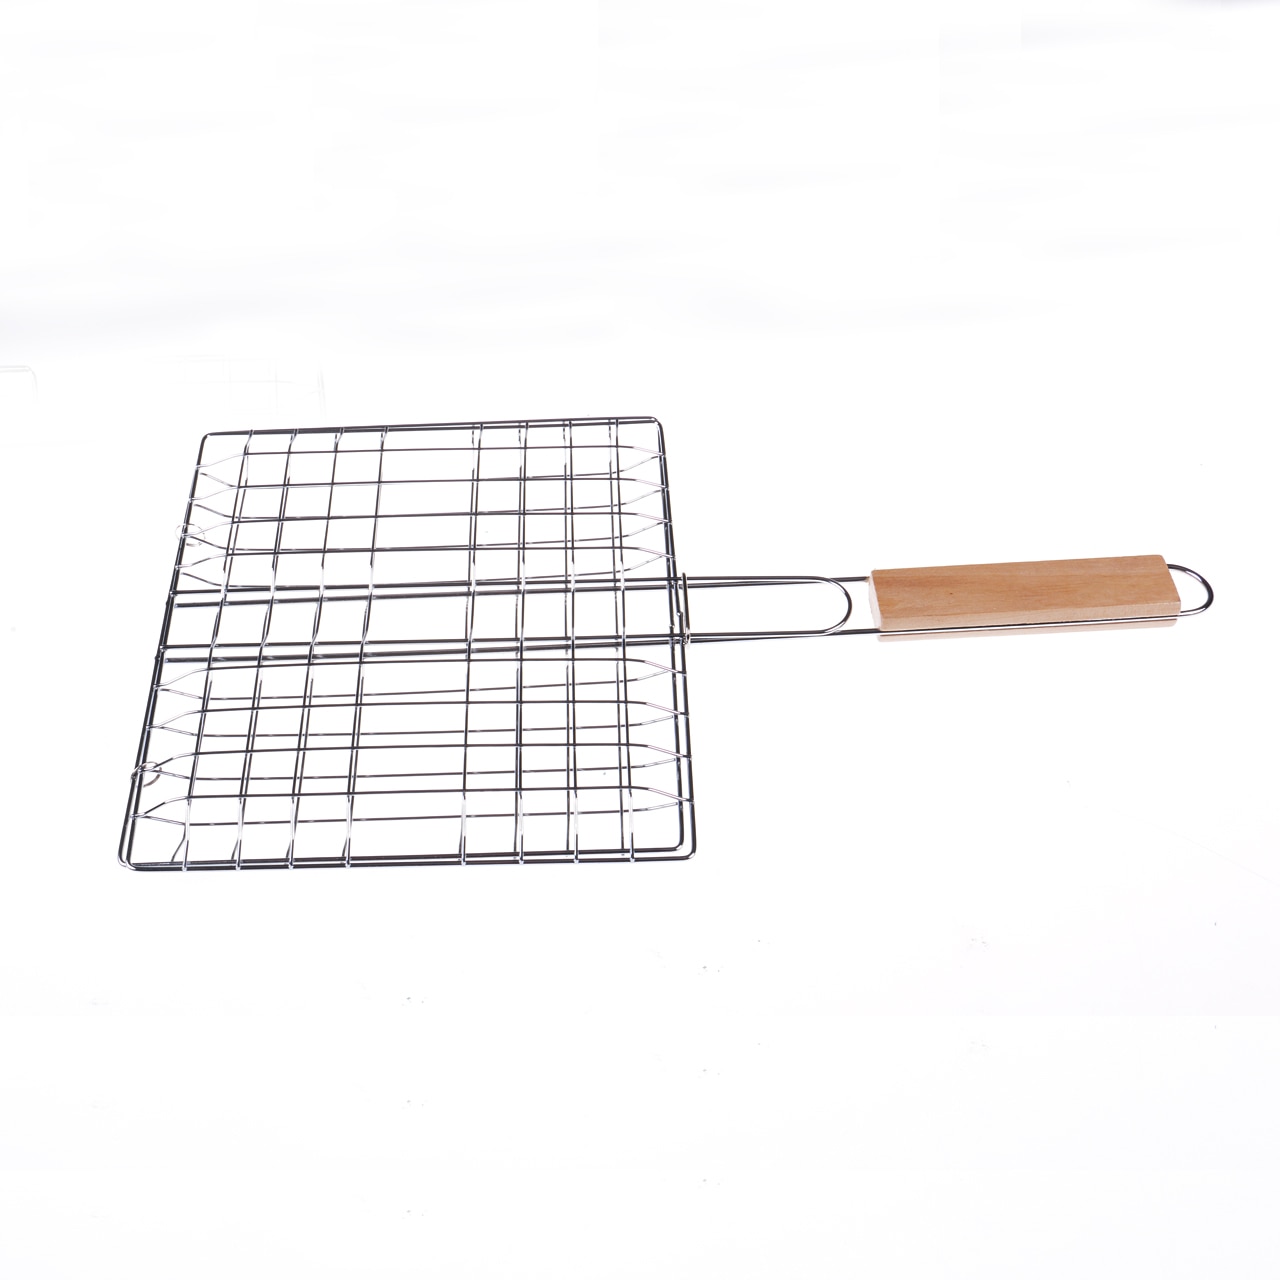 BBQ Tools Meat Fish Grill Basket Vegetables Barbeque Food Holder Barbecue Tray Portable Wild barbecue net Easy Washable